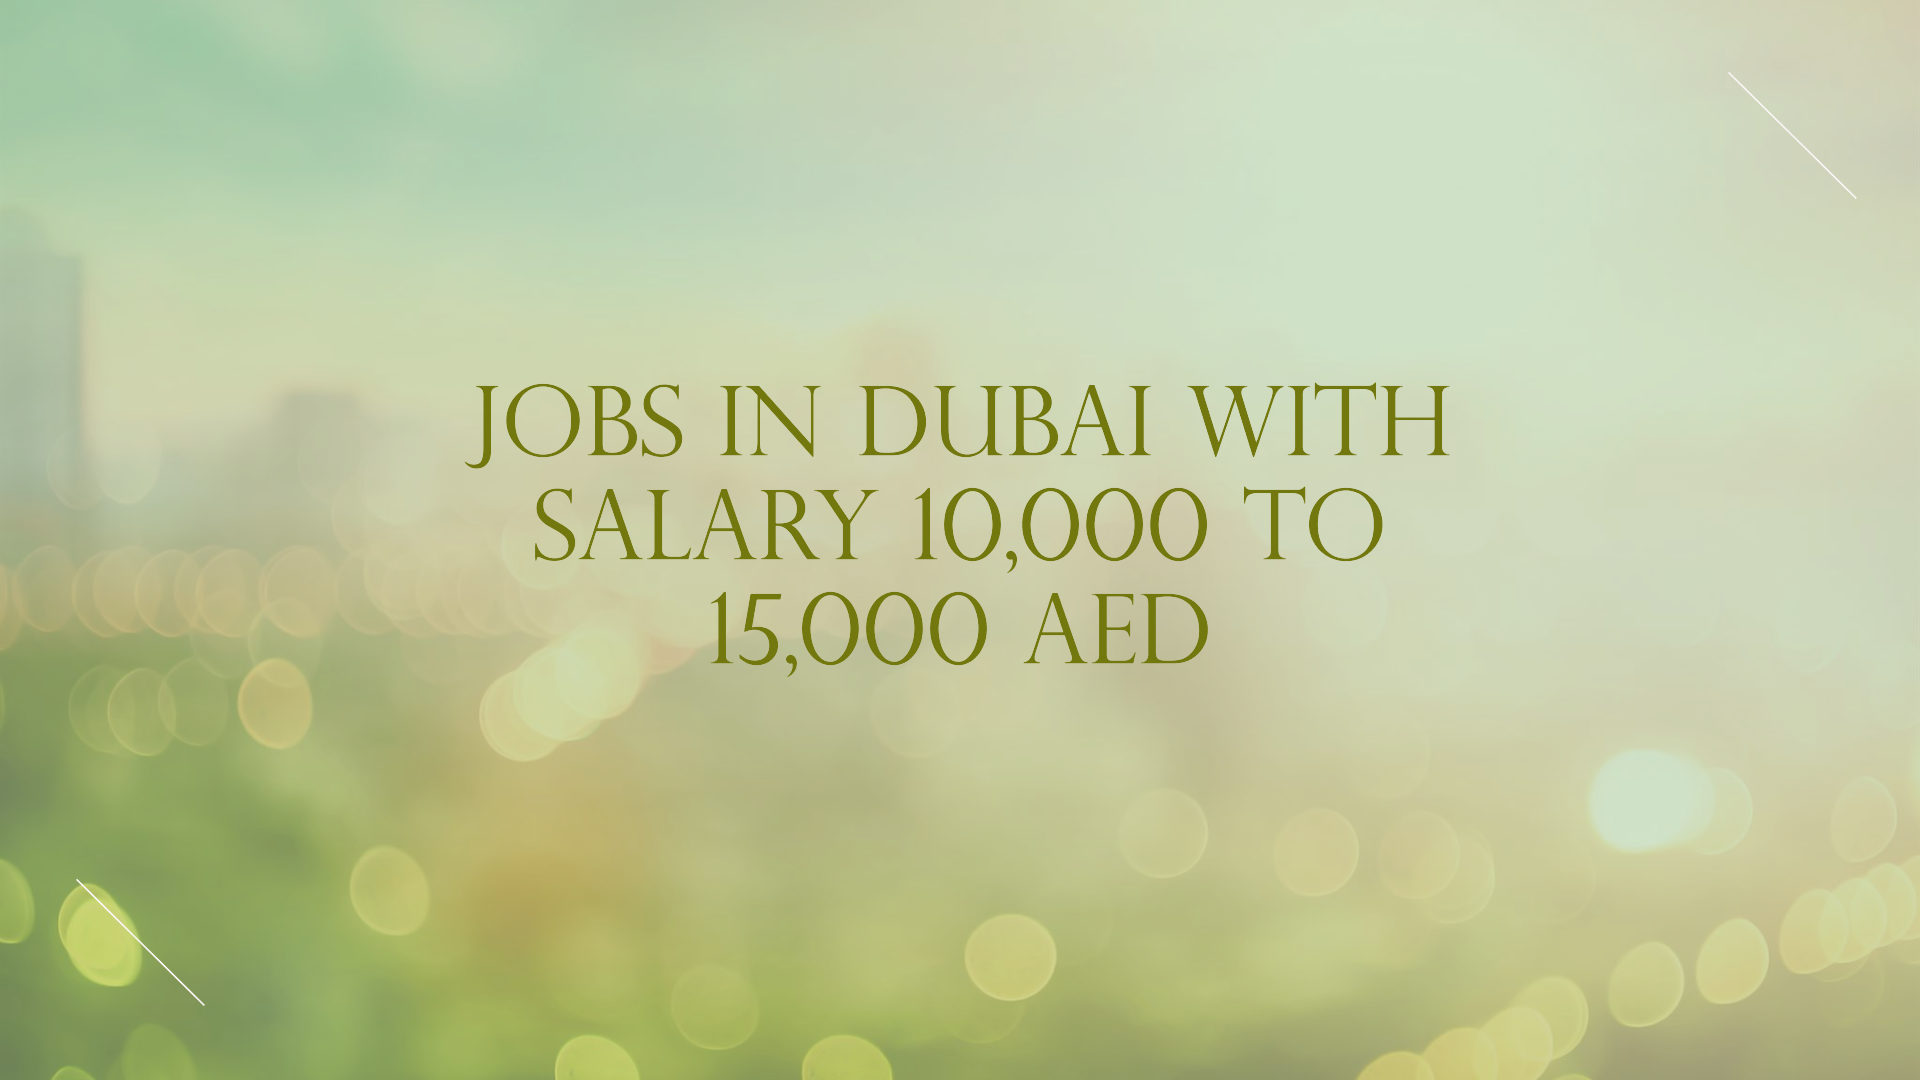 jobs in dubai with salary 10,000 to 15,000 AED